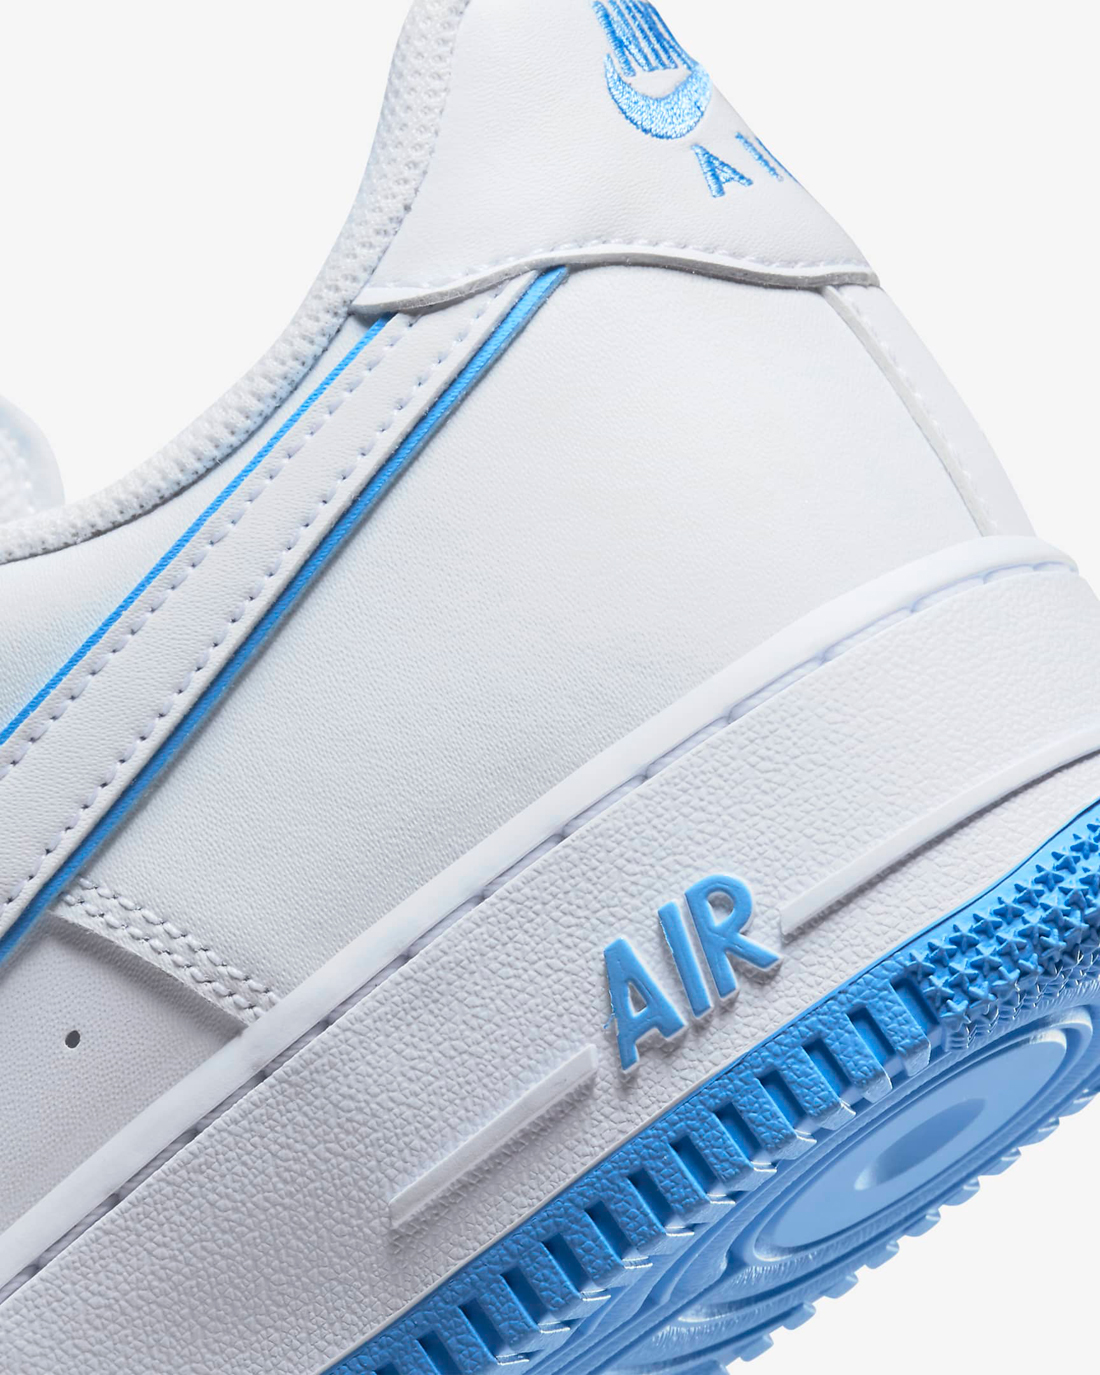 Nike-Air-Force-1-Low-White-University-Blue-Release-Date-Info-8